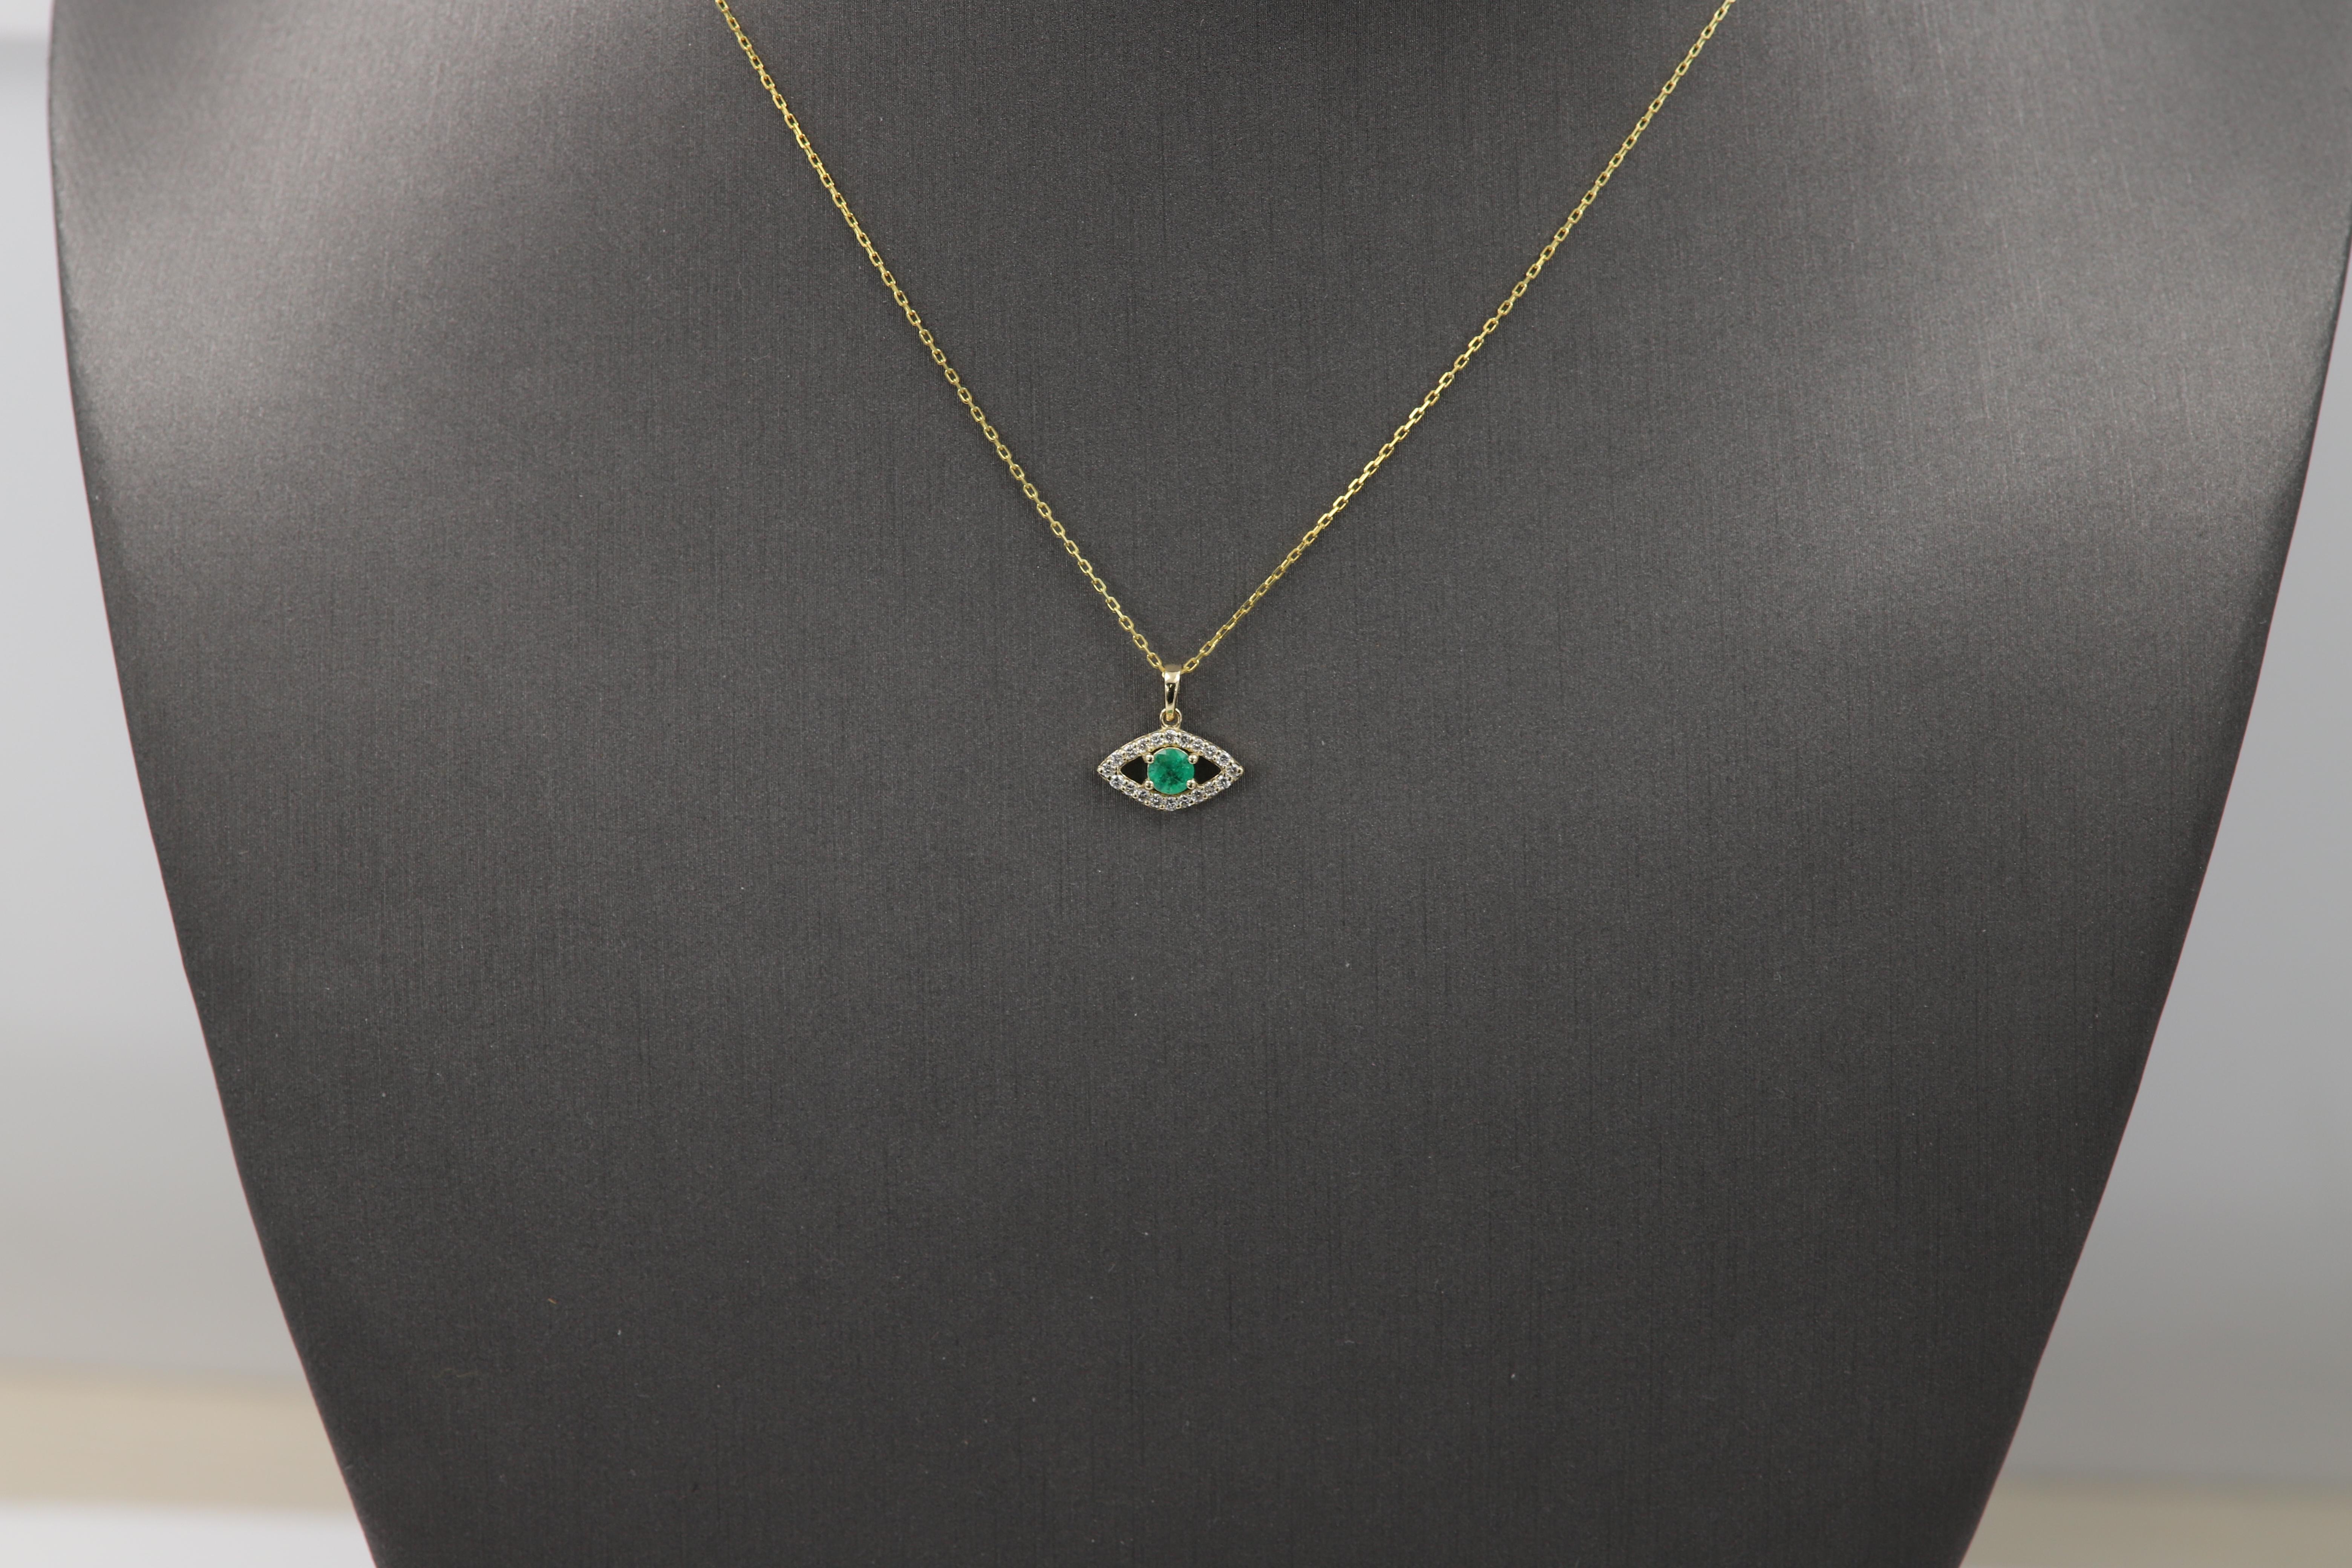 Brilliant Cute Mini Gold Evil Eye Pendant

Natural Diamonds and Orange Sapphire
14k Yellow Gold  0.50 grams (without the chain)
Made with very Shiny quality diamonds G-F-VS approx 0.14 carat.

the small size makes it very cute and trendy.
Center 